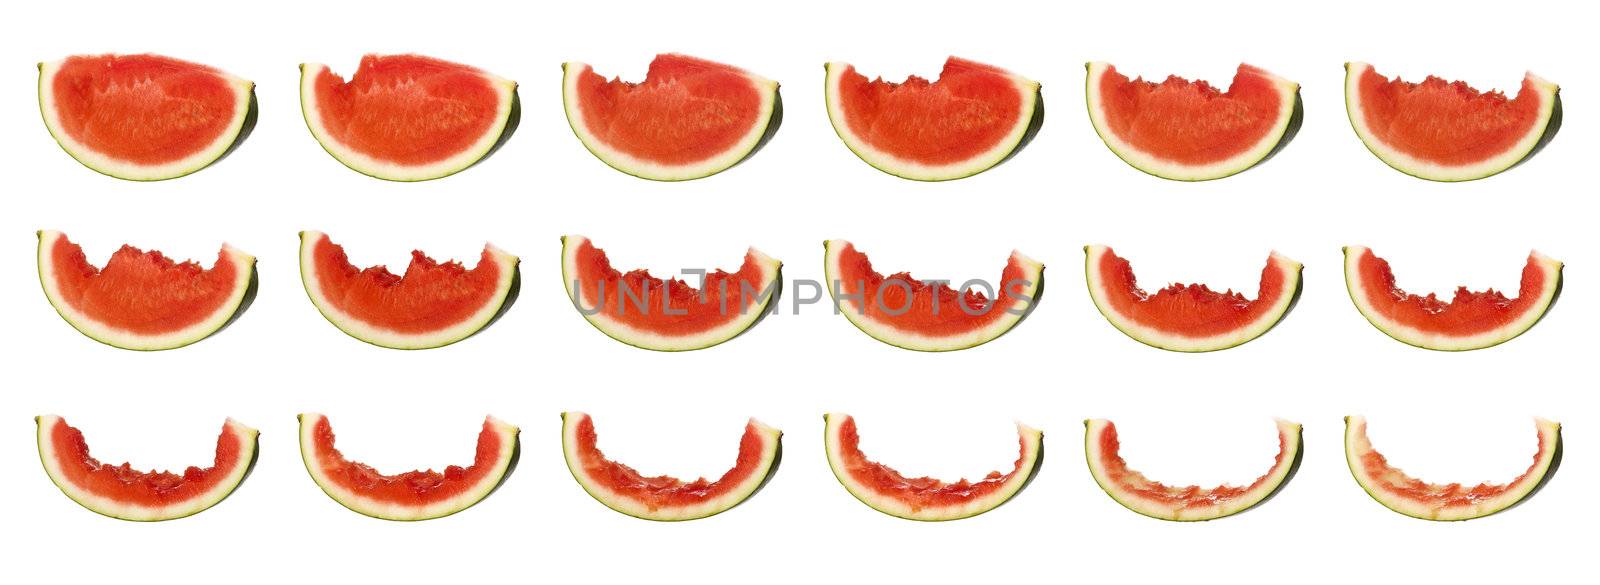 Tasty watermelon in progress isolated on white background by gemenacom